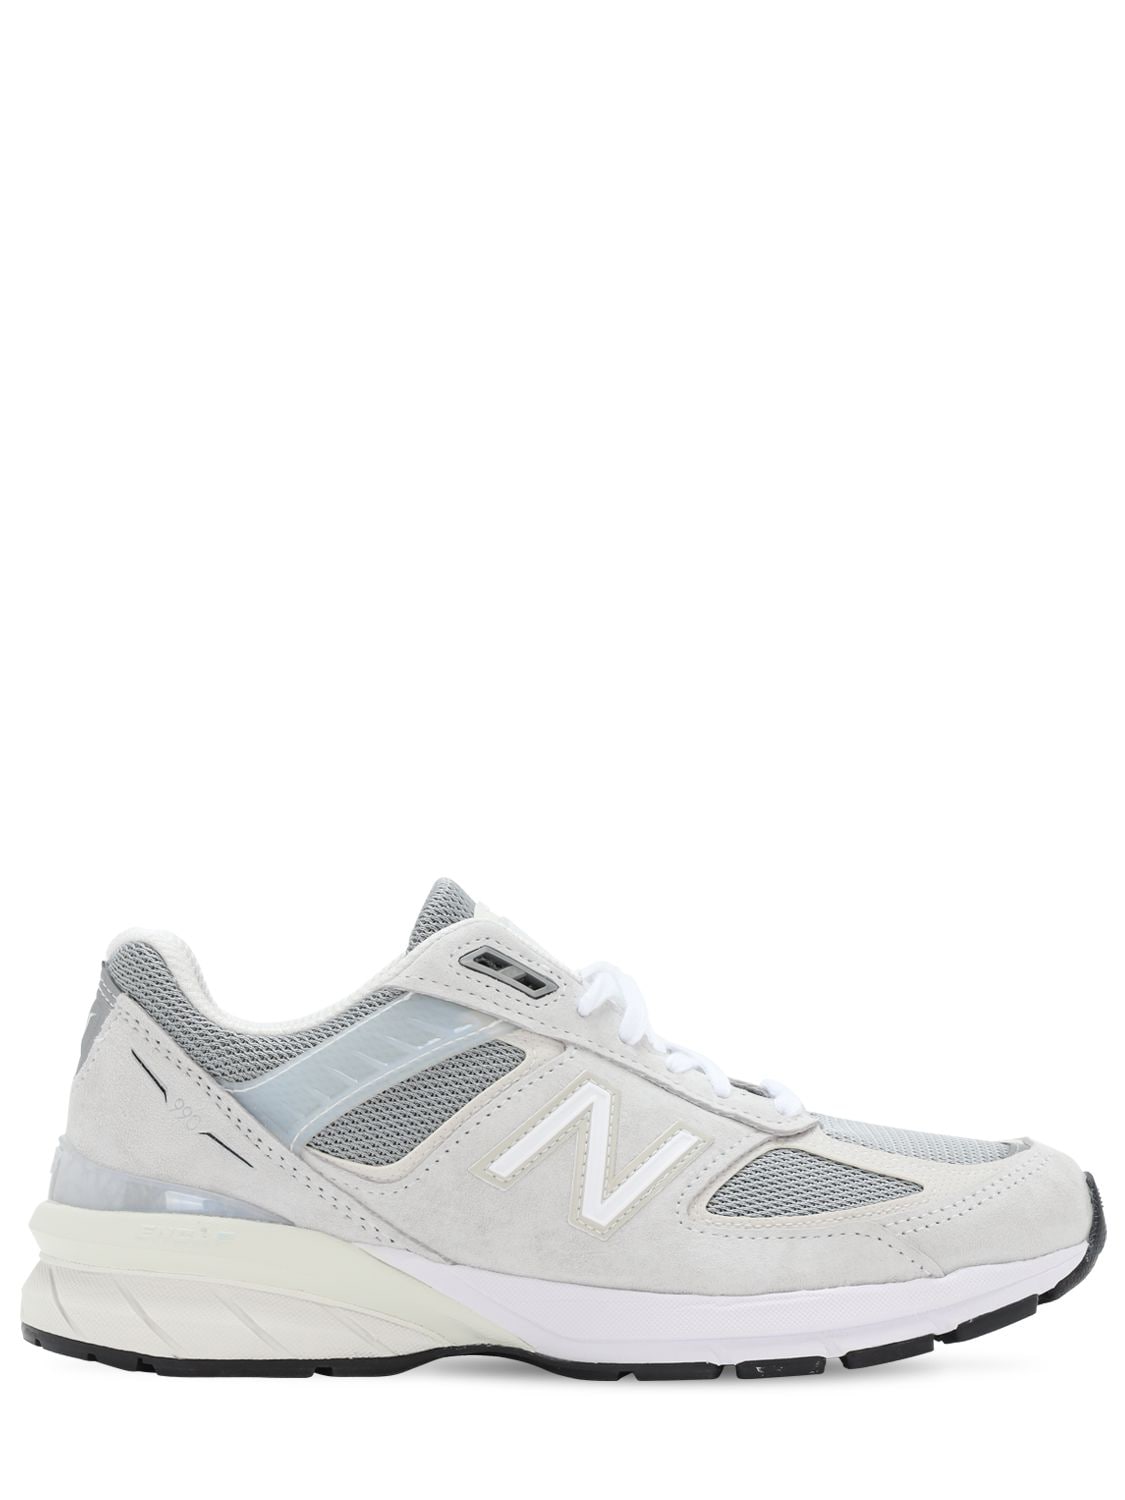 New Balance 990 V5 Suede & Mesh Sneakers In White